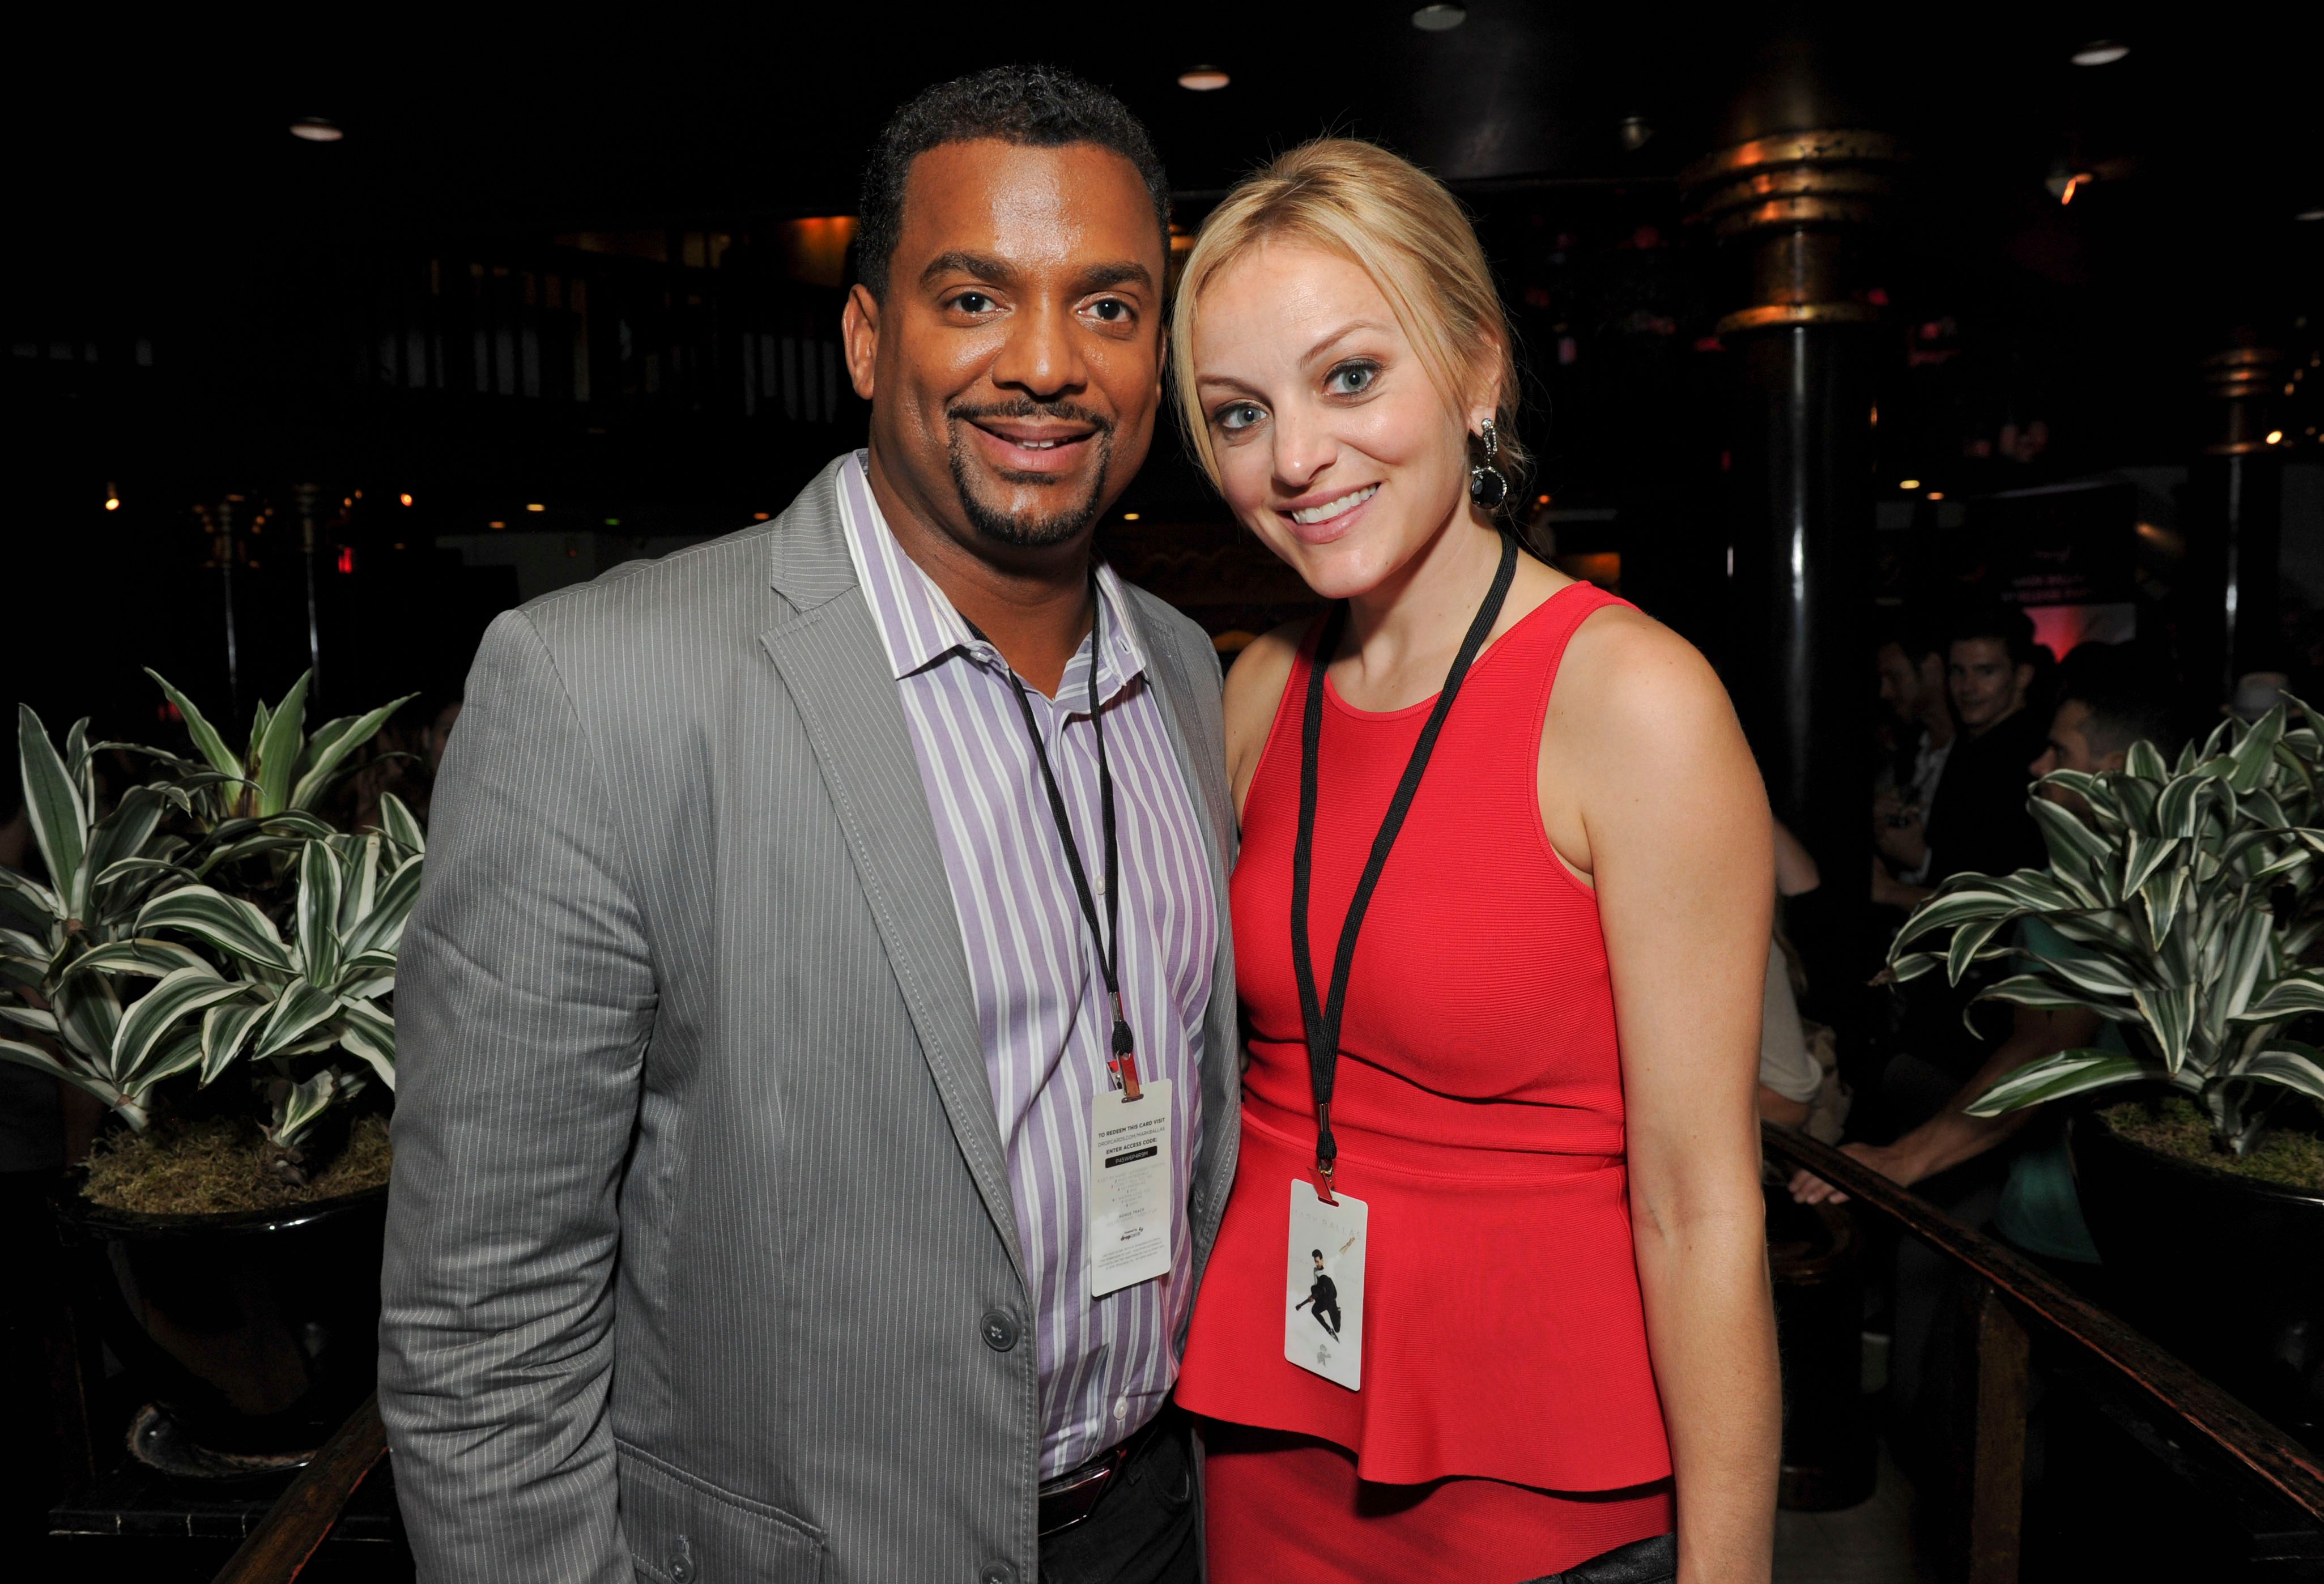 Alfonso Ribeiro and his wife attending Mark Ballas Debuts EP "Kicking Clouds" on September 16, 2014 in California. Photo by Allen Berezovsky | Source: Getty Images